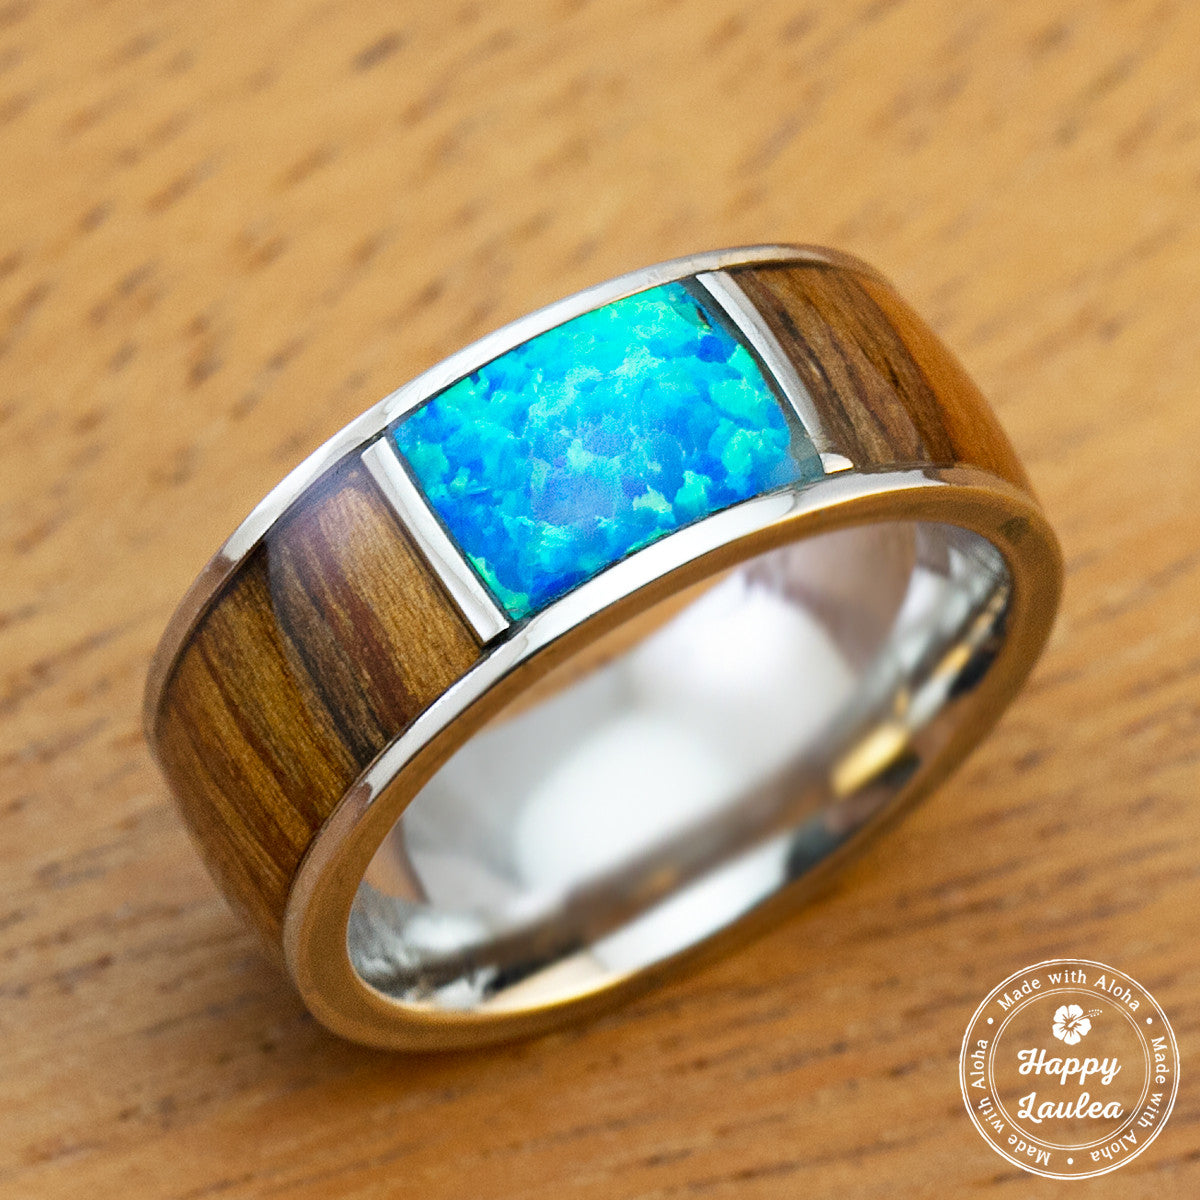 Stainless Steel Ring with Koa Wood & Center Opal Inlay - 8mm, Dome Shape, Comfort Fitment